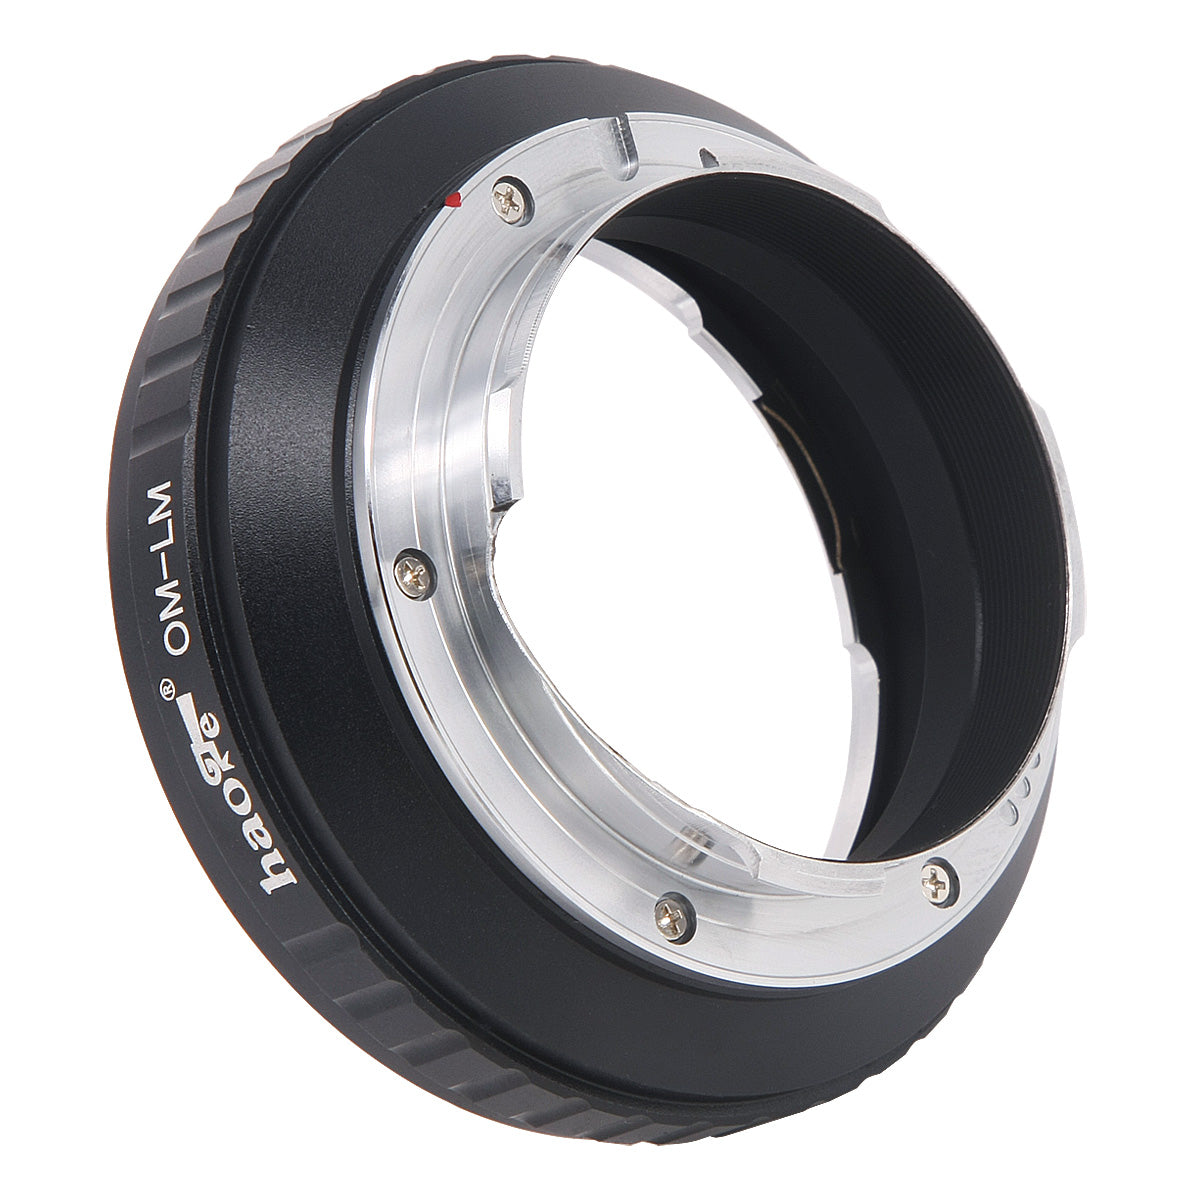 Haoge Lens Mount Adapter for Olympus OM mount Lens to Leica M-mount Camera such as M240, M240P, M262, M3, M2, M1, M4, M5, CL, M6, MP, M7, M8, M9, M9-P, M Monochrom, M-E, M, M-P, M10, M-A